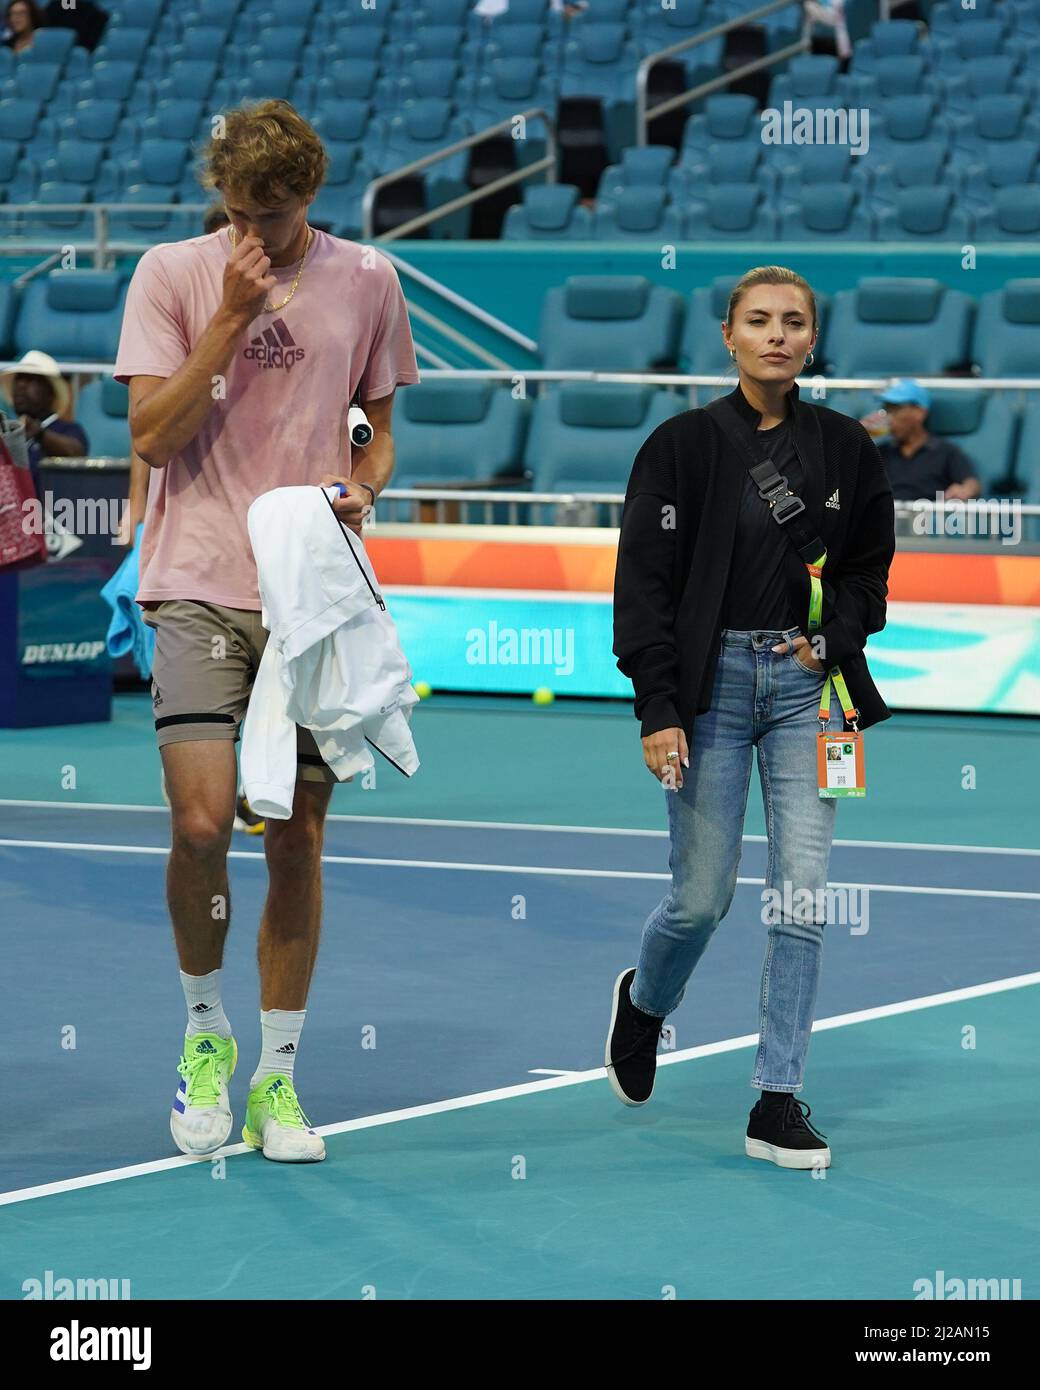 Miami Gardens, FL, USA. 30th Mar, 2022. Alexander Zverev and girlfriend Sophia Thomalla seen walking off the practice court during The Miami Open at Hard Rock Stadium on March 30, 2022 in Miami Gardens, Florida. Credit: Mpi04/Media Punch/Alamy Live News Stock Photo